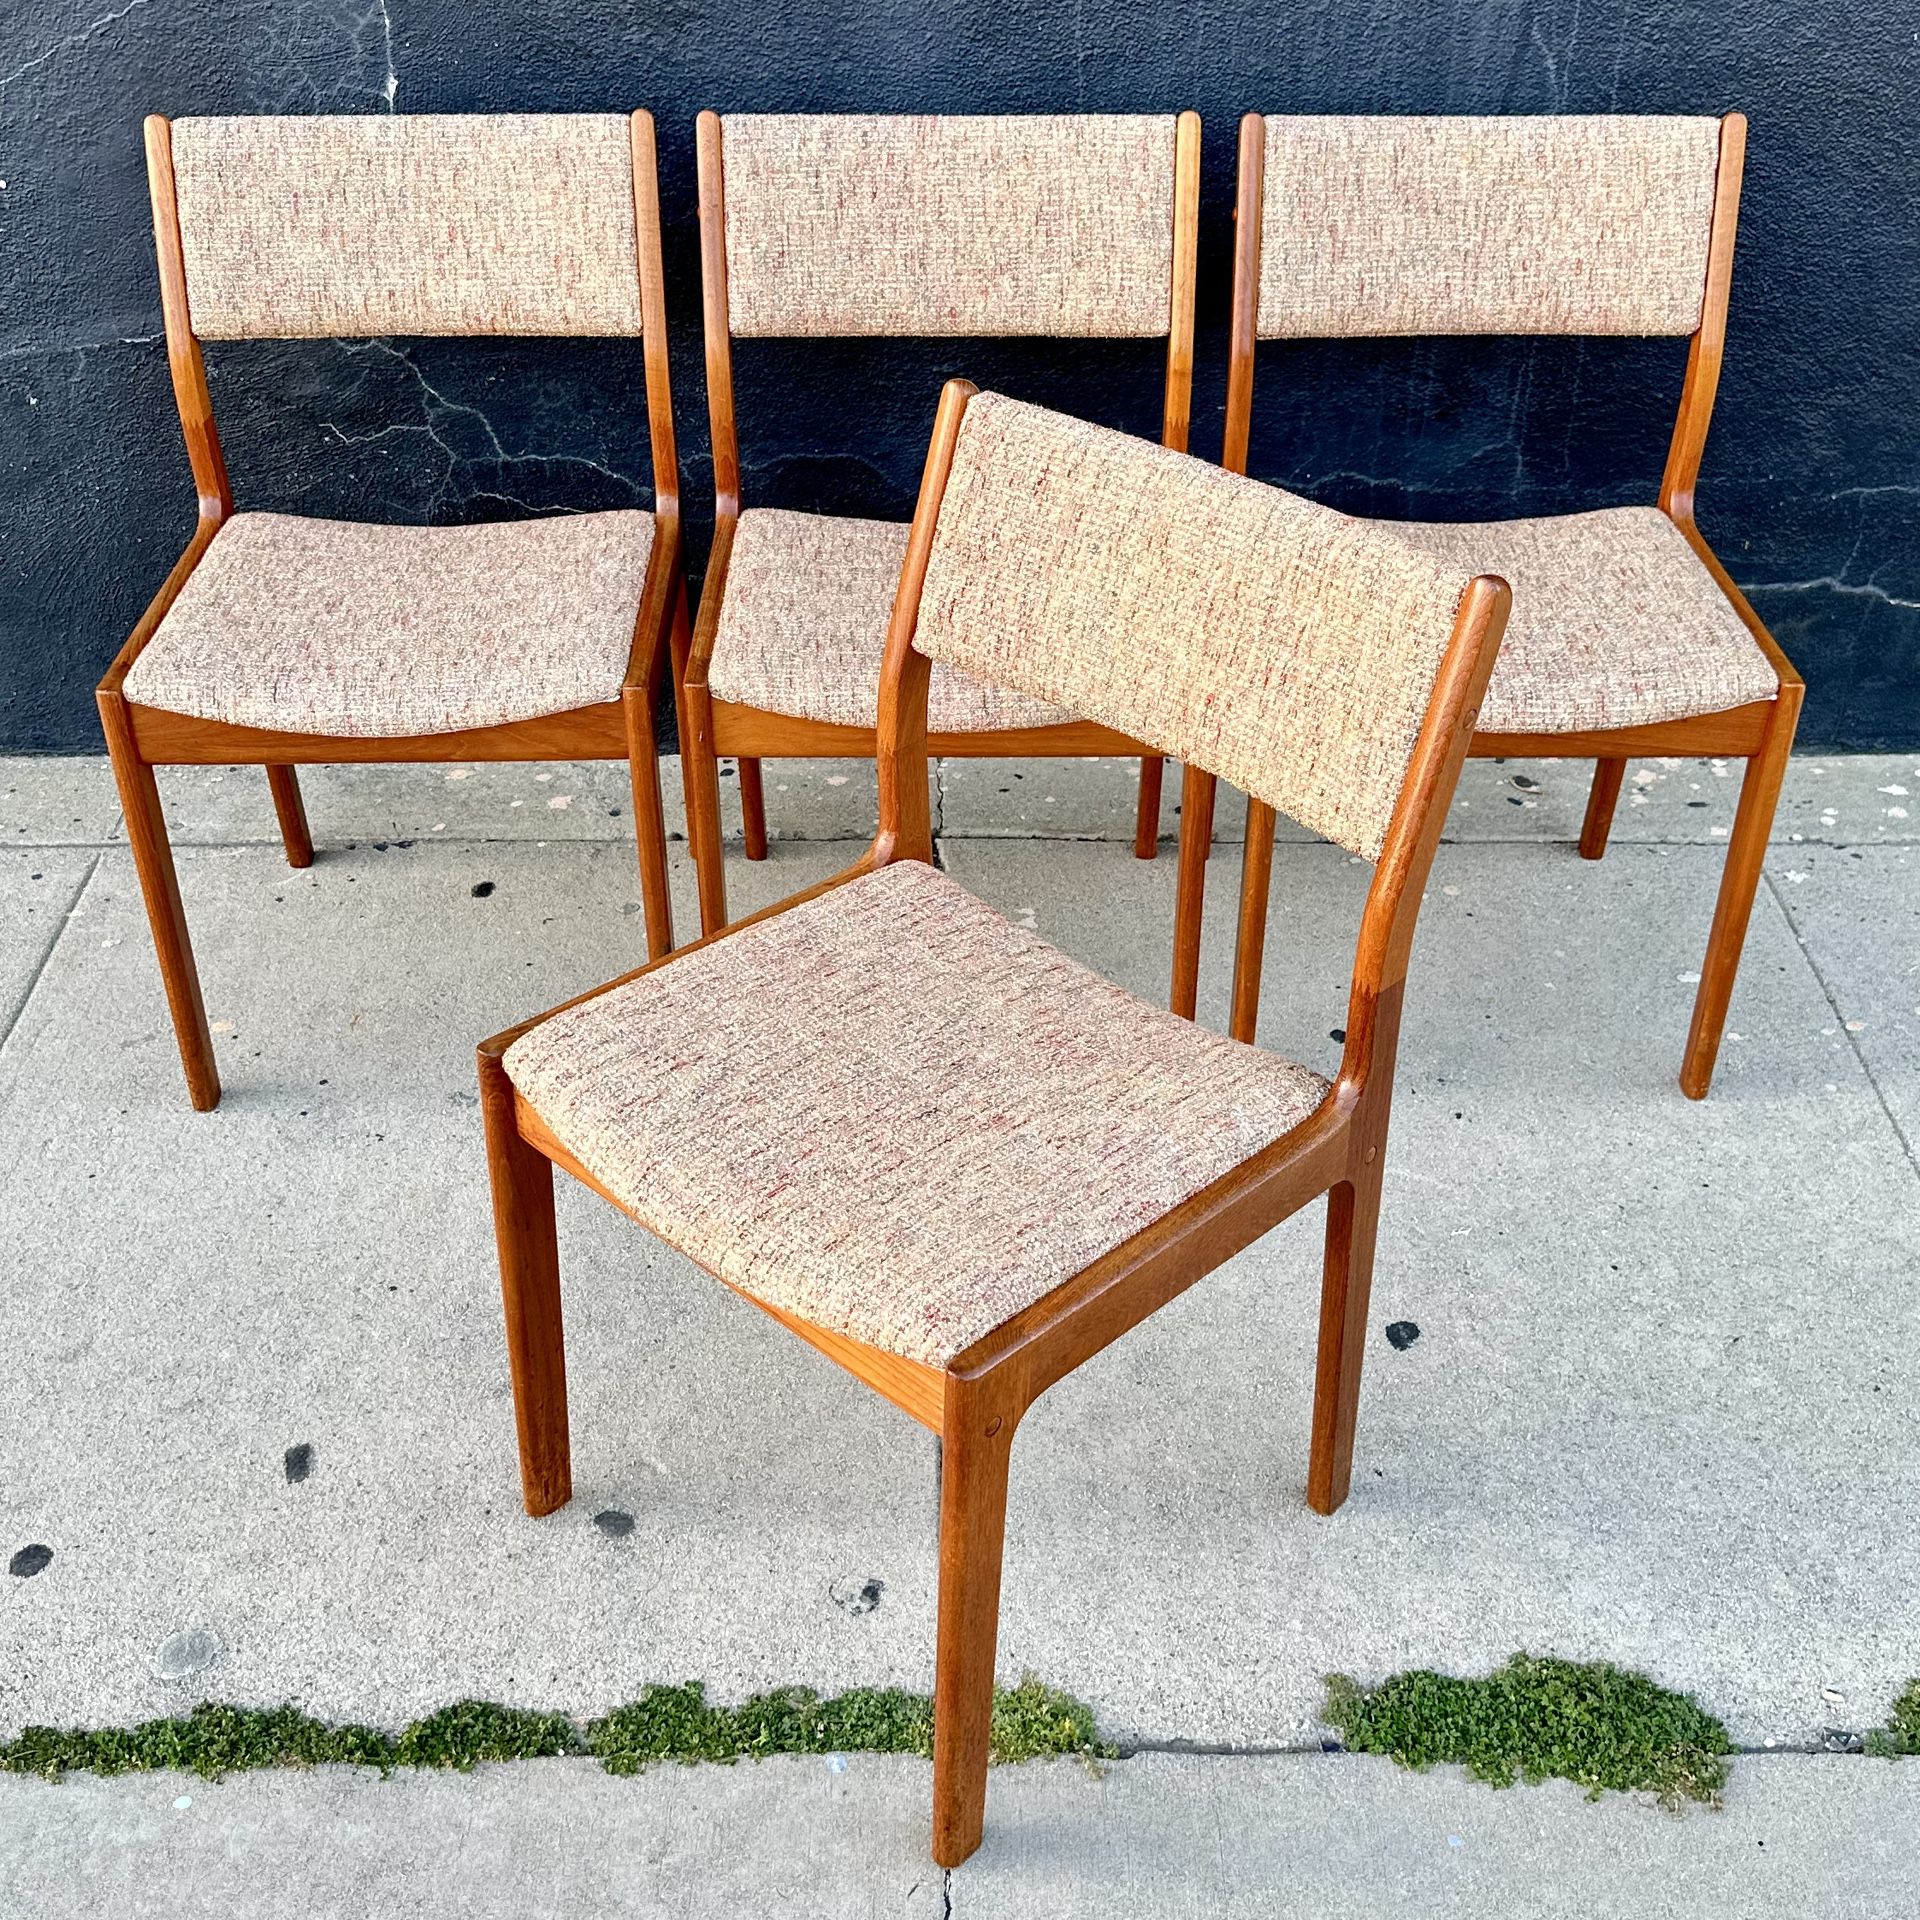 Vintage Danish Modern Teak Dining Chairs by D-Scan